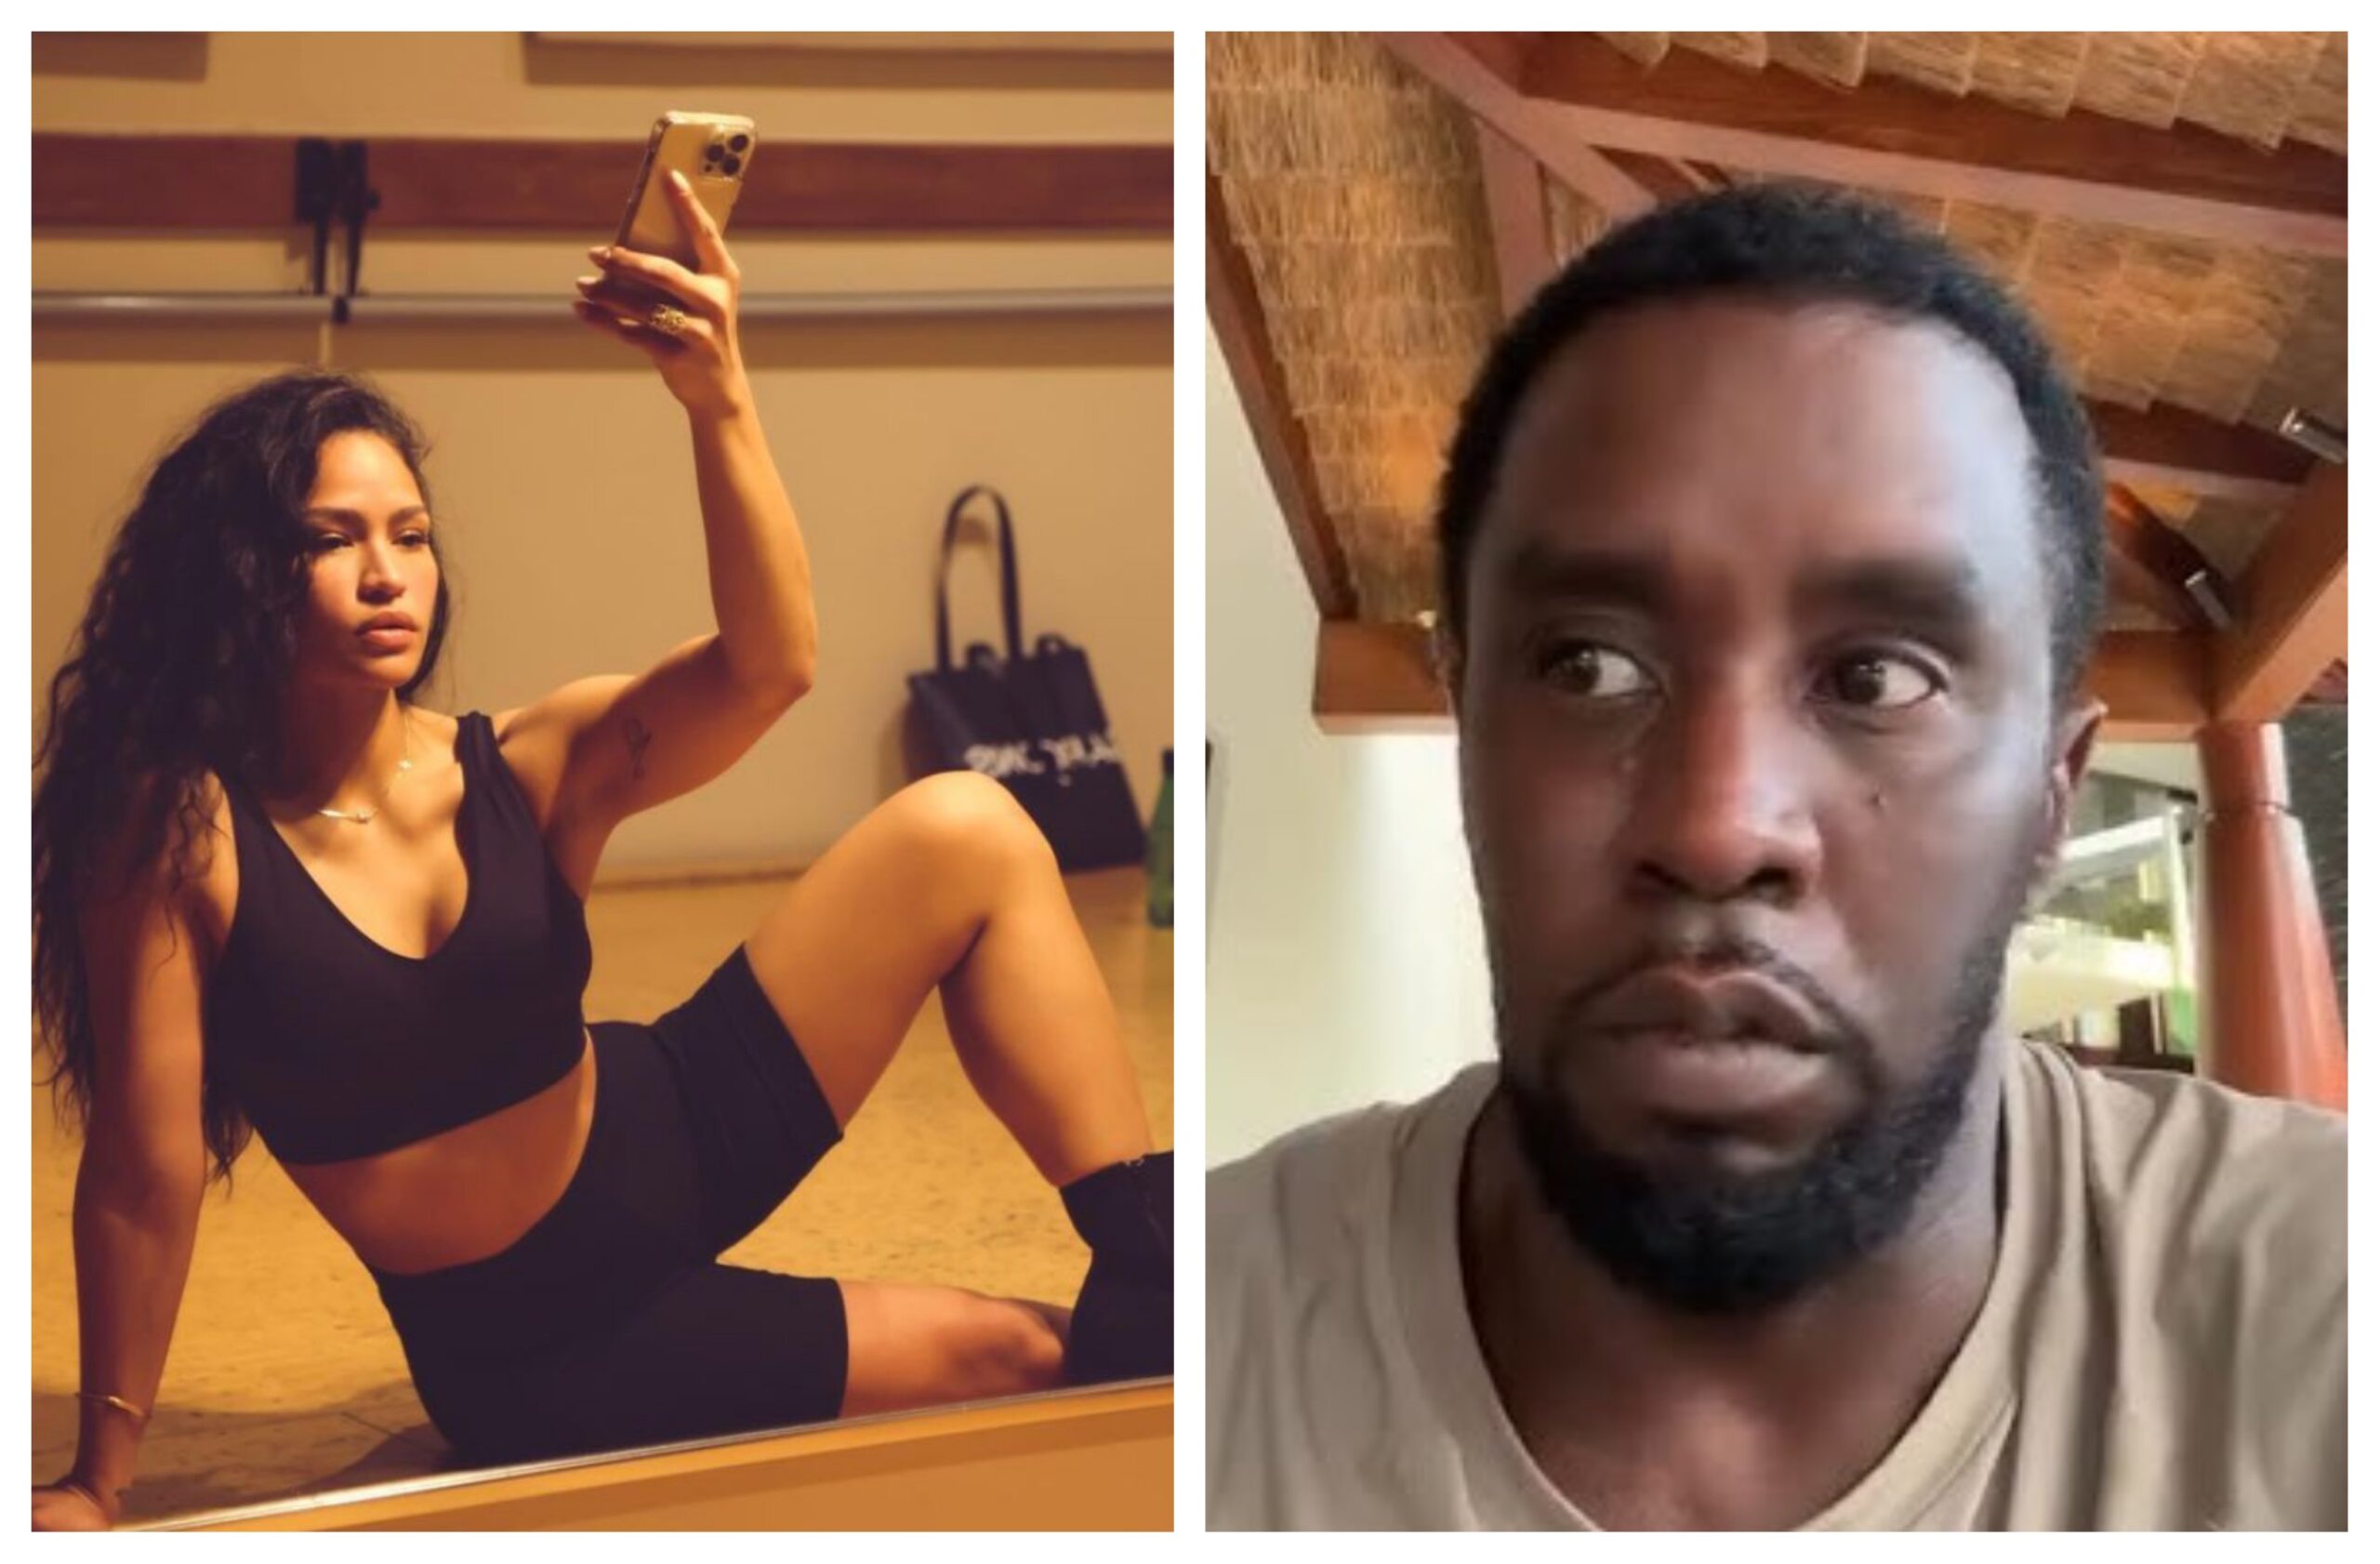 Cassie’s Lawyer SLAMS Diddy’s “Pathetic” Apology for Violent Attack in Viral Video: “It’s More About Himself”